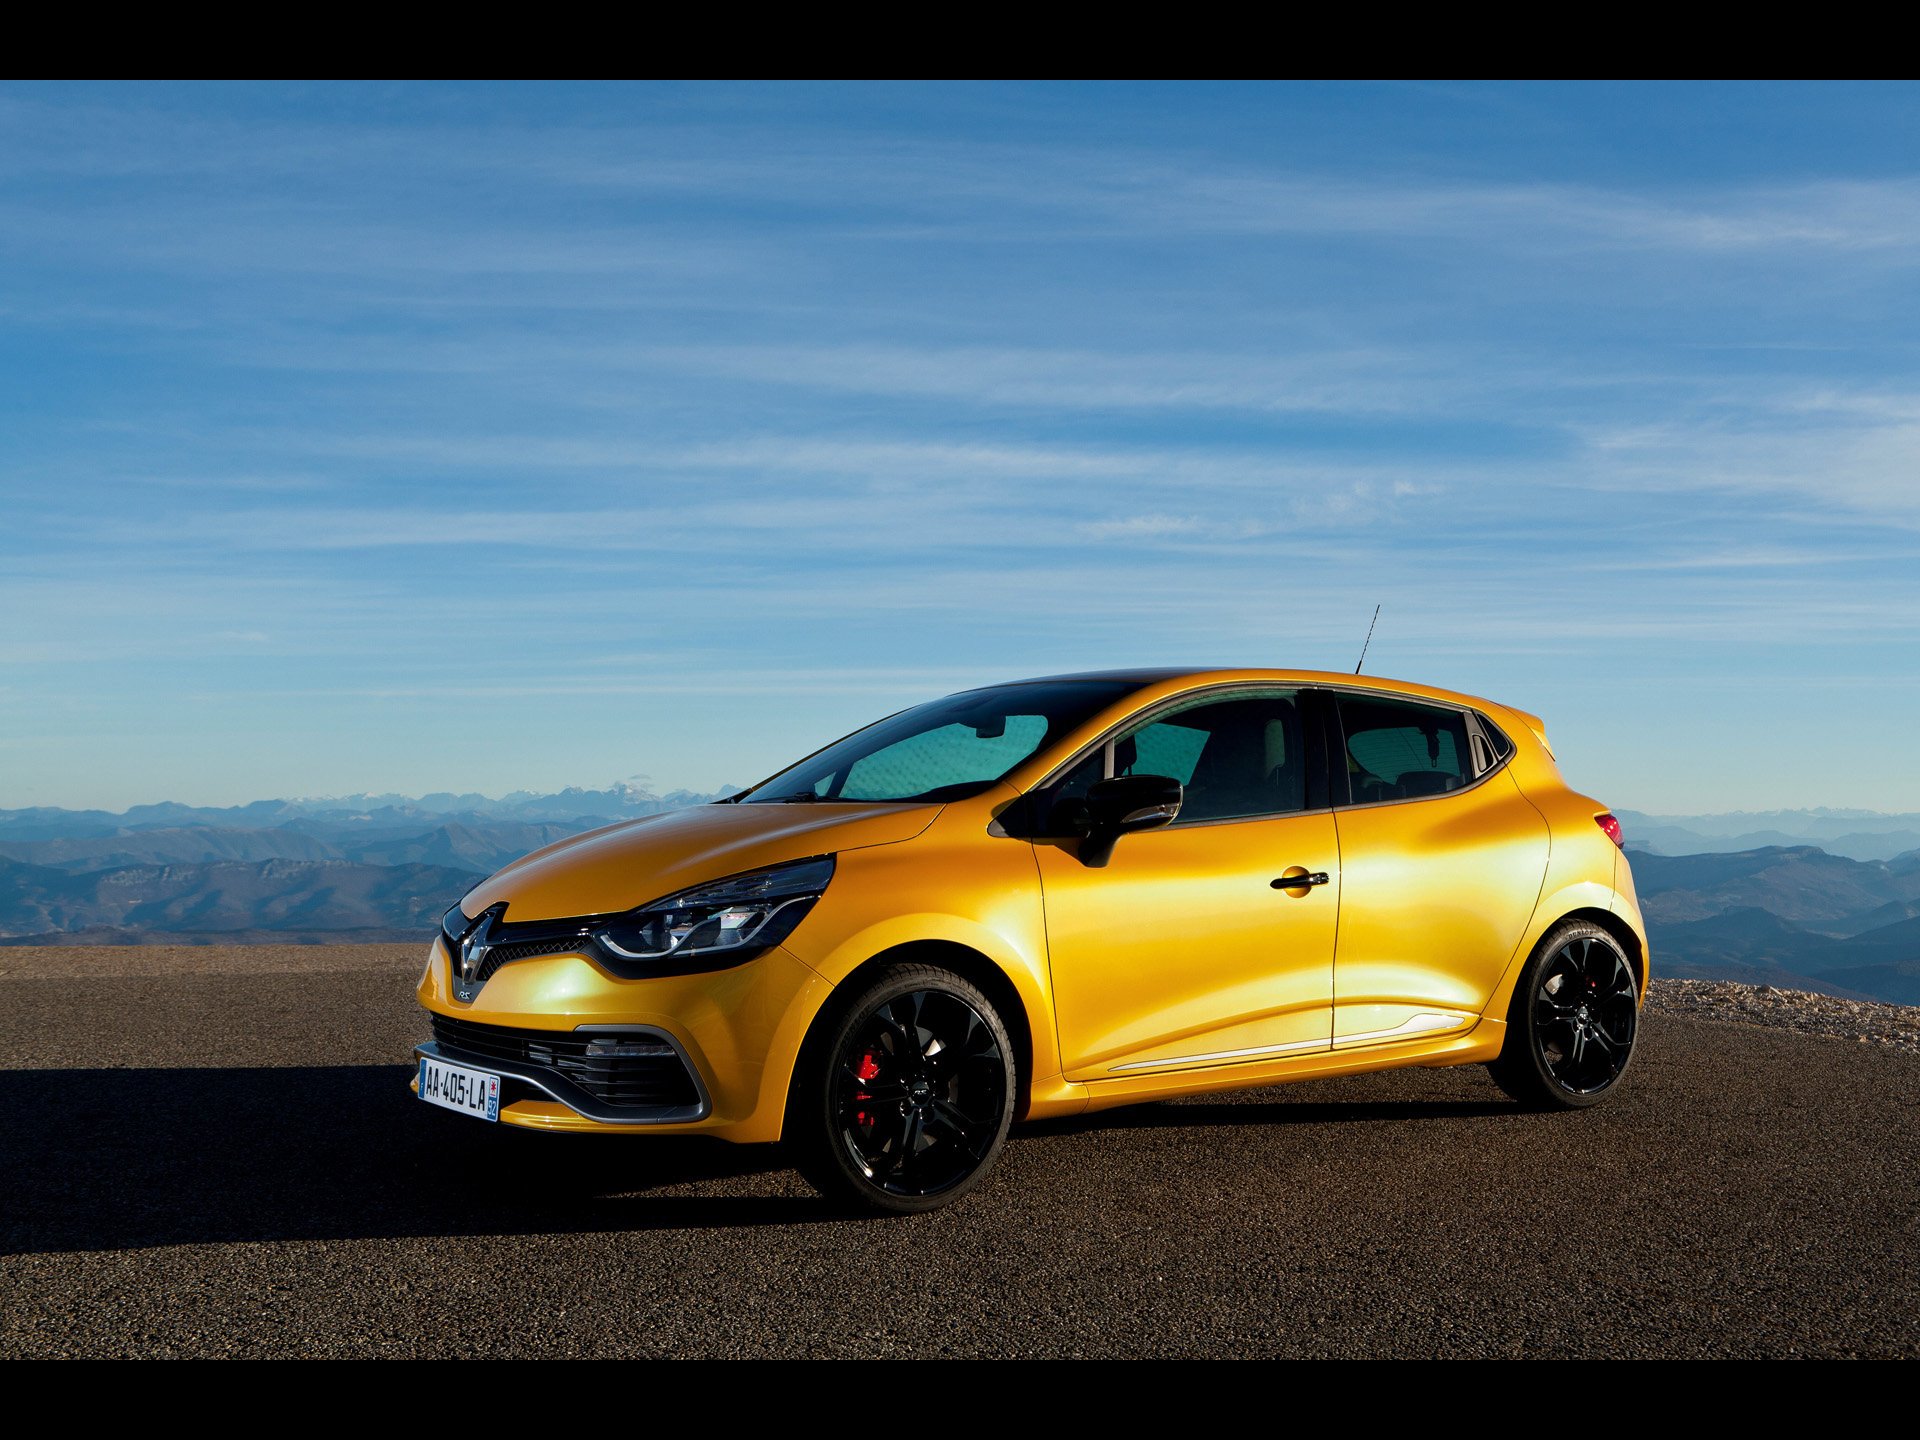 2013 Renault Clio Rs 200 Edc Wallpapers